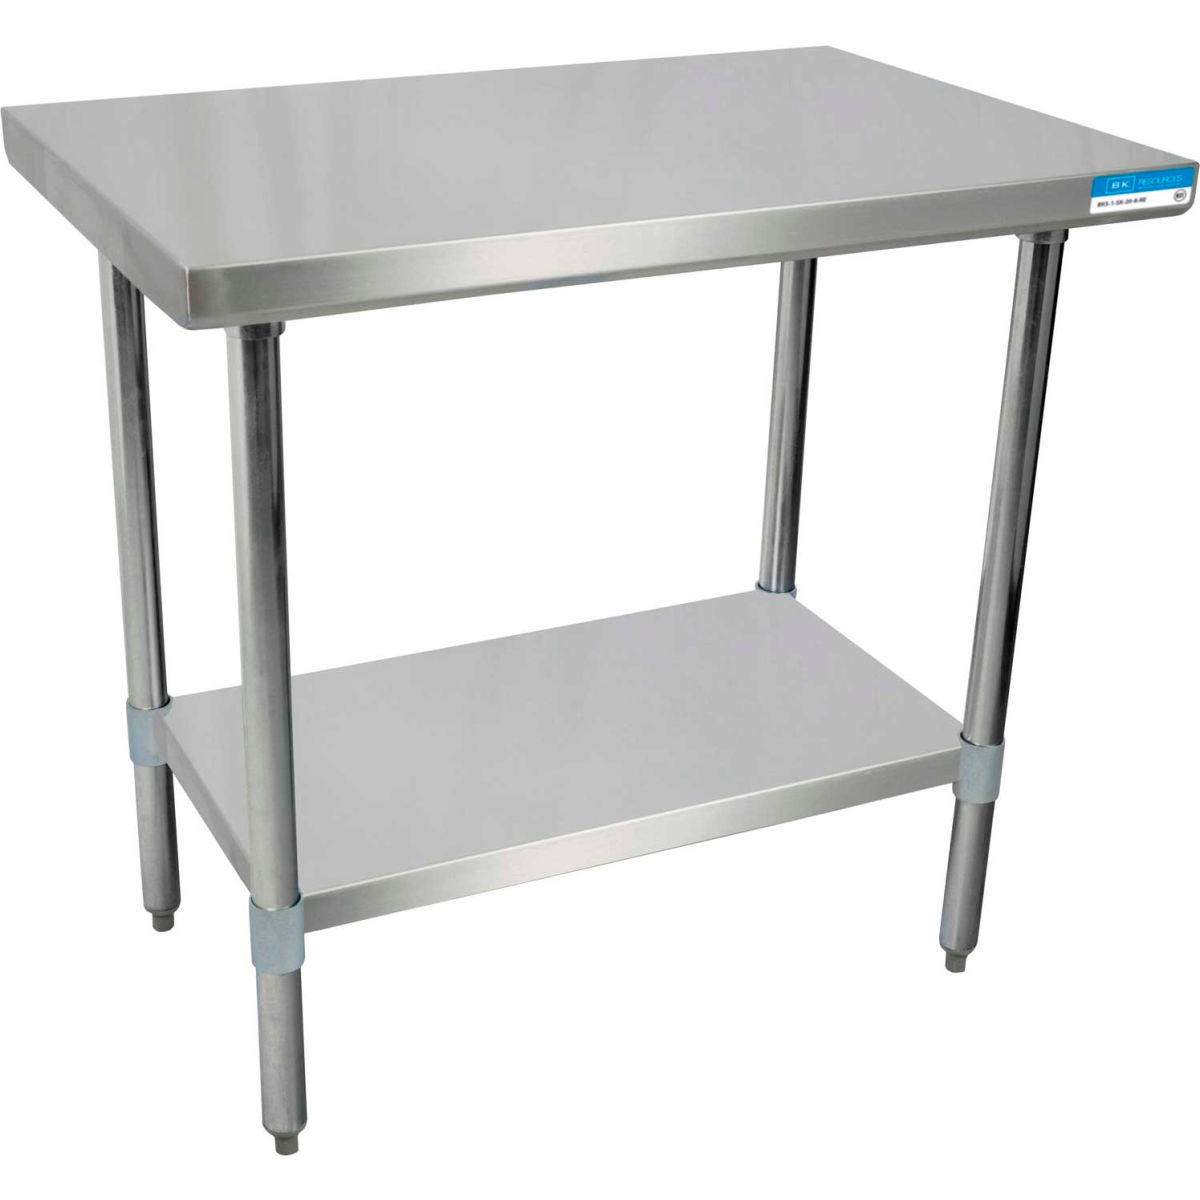 Picture of BK Resources B1516233 18 Gauge 430 Series Stainless Workbench with Undershelf - 30 x 18 in.